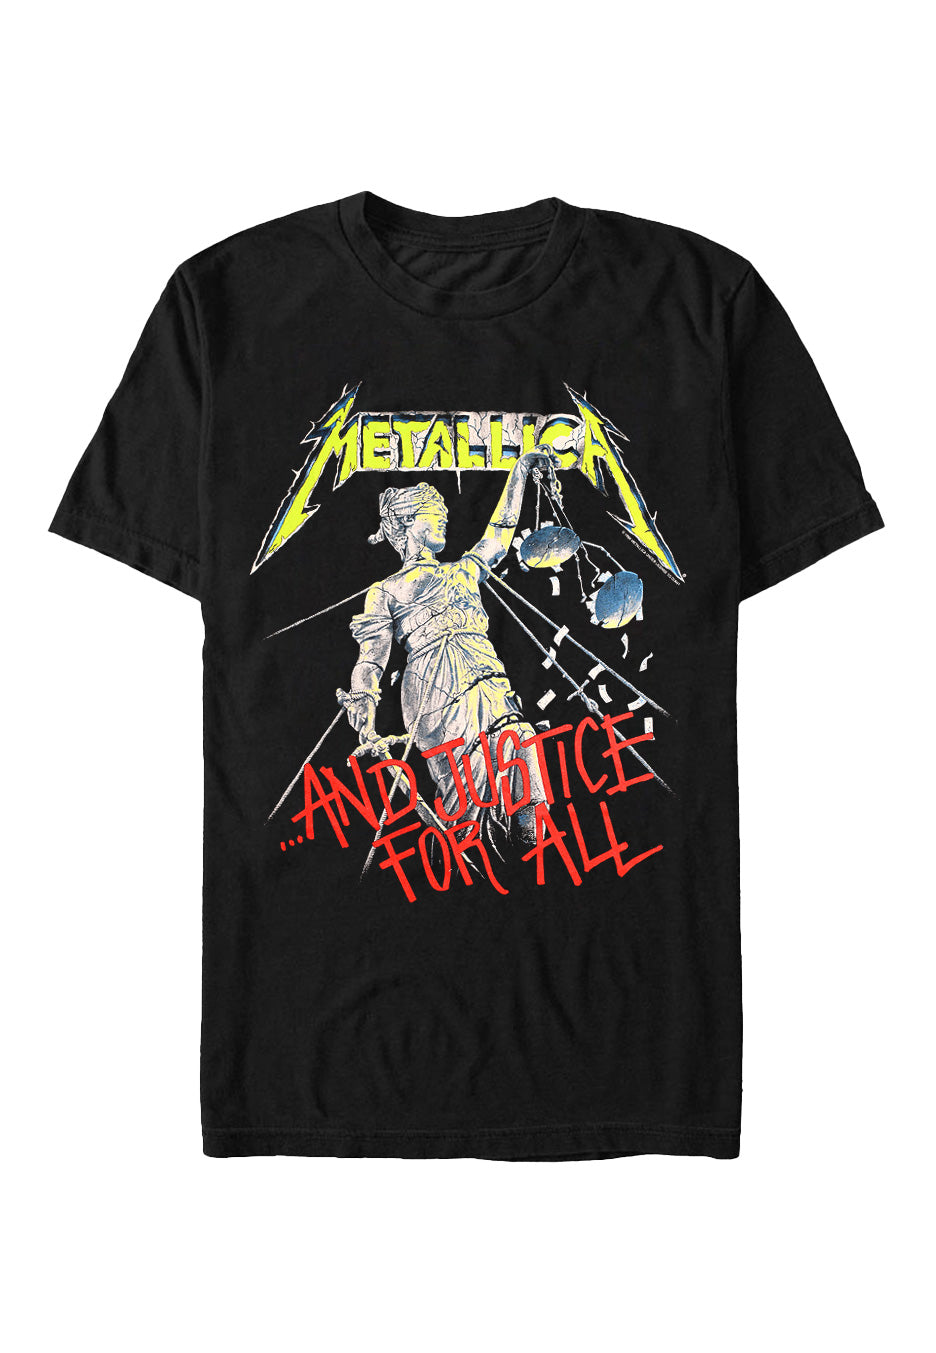 Metallica - And Justice For All (Original) - T-Shirt